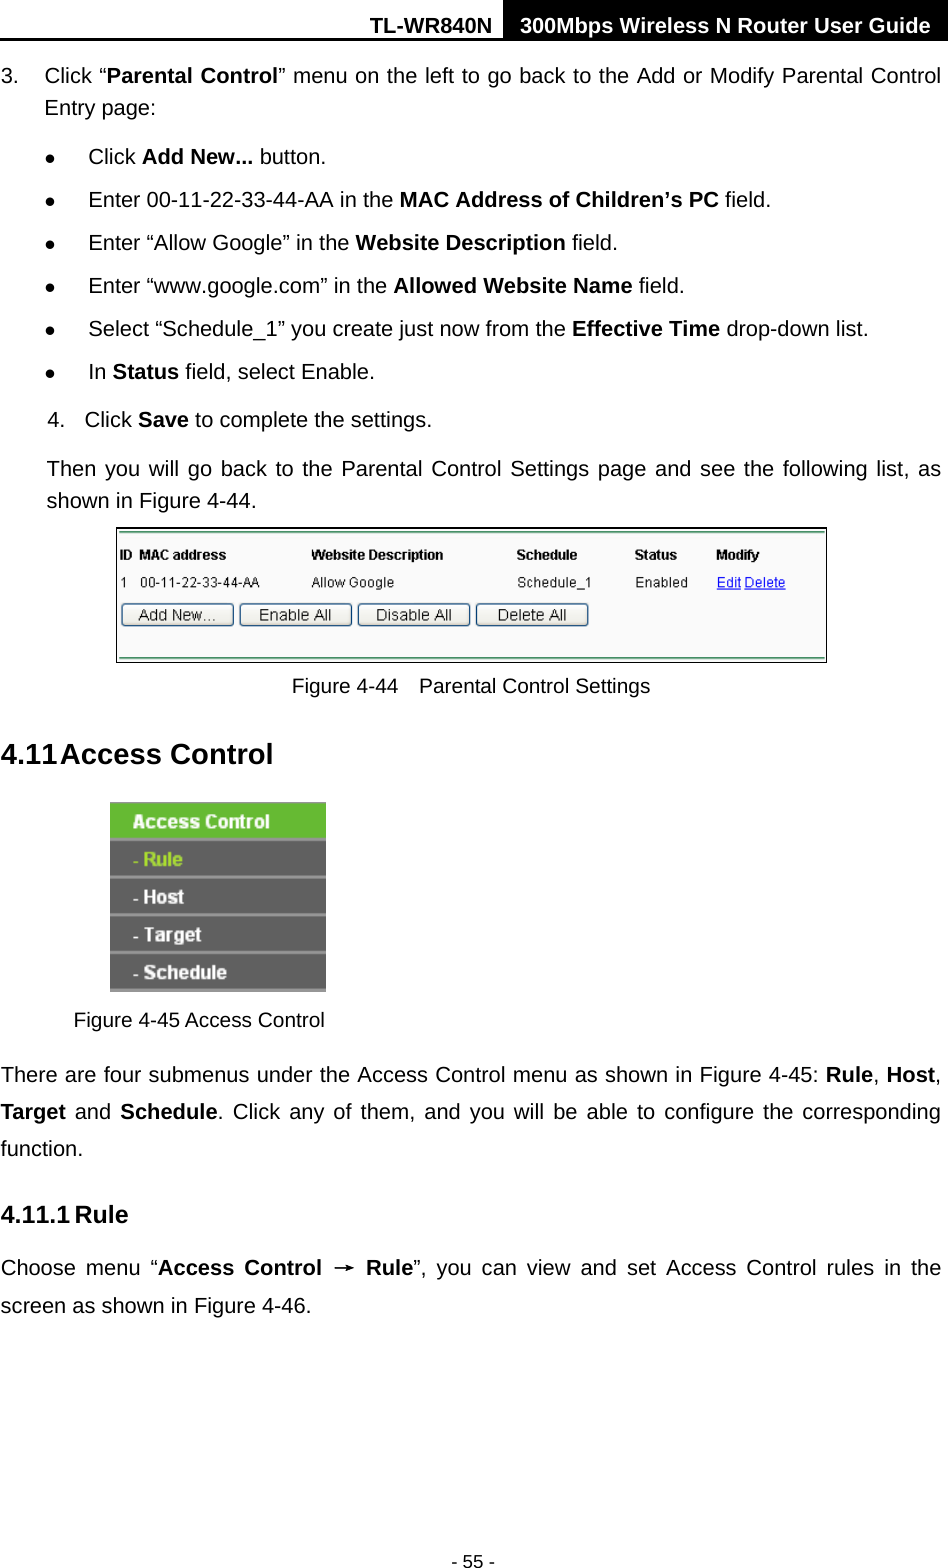 TL-WR840N 300Mbps Wireless N Router User Guide  - 55 - 3. Click “Parental Control” menu on the left to go back to the Add or Modify Parental Control Entry page:    Click Add New... button.    Enter 00-11-22-33-44-AA in the MAC Address of Children’s PC field.    Enter “Allow Google” in the Website Description field.    Enter “www.google.com” in the Allowed Website Name field.    Select “Schedule_1” you create just now from the Effective Time drop-down list.    In Status field, select Enable.   4. Click Save to complete the settings. Then you will go back to the Parental Control Settings page and see the following list, as shown in Figure 4-44.  Figure 4-44  Parental Control Settings 4.11 Access Control  Figure 4-45 Access Control There are four submenus under the Access Control menu as shown in Figure 4-45: Rule, Host, Target and Schedule. Click any of them, and you will be able to configure the corresponding function. 4.11.1 Rule Choose menu “Access Control → Rule”, you can view and set Access Control rules  in the screen as shown in Figure 4-46.   